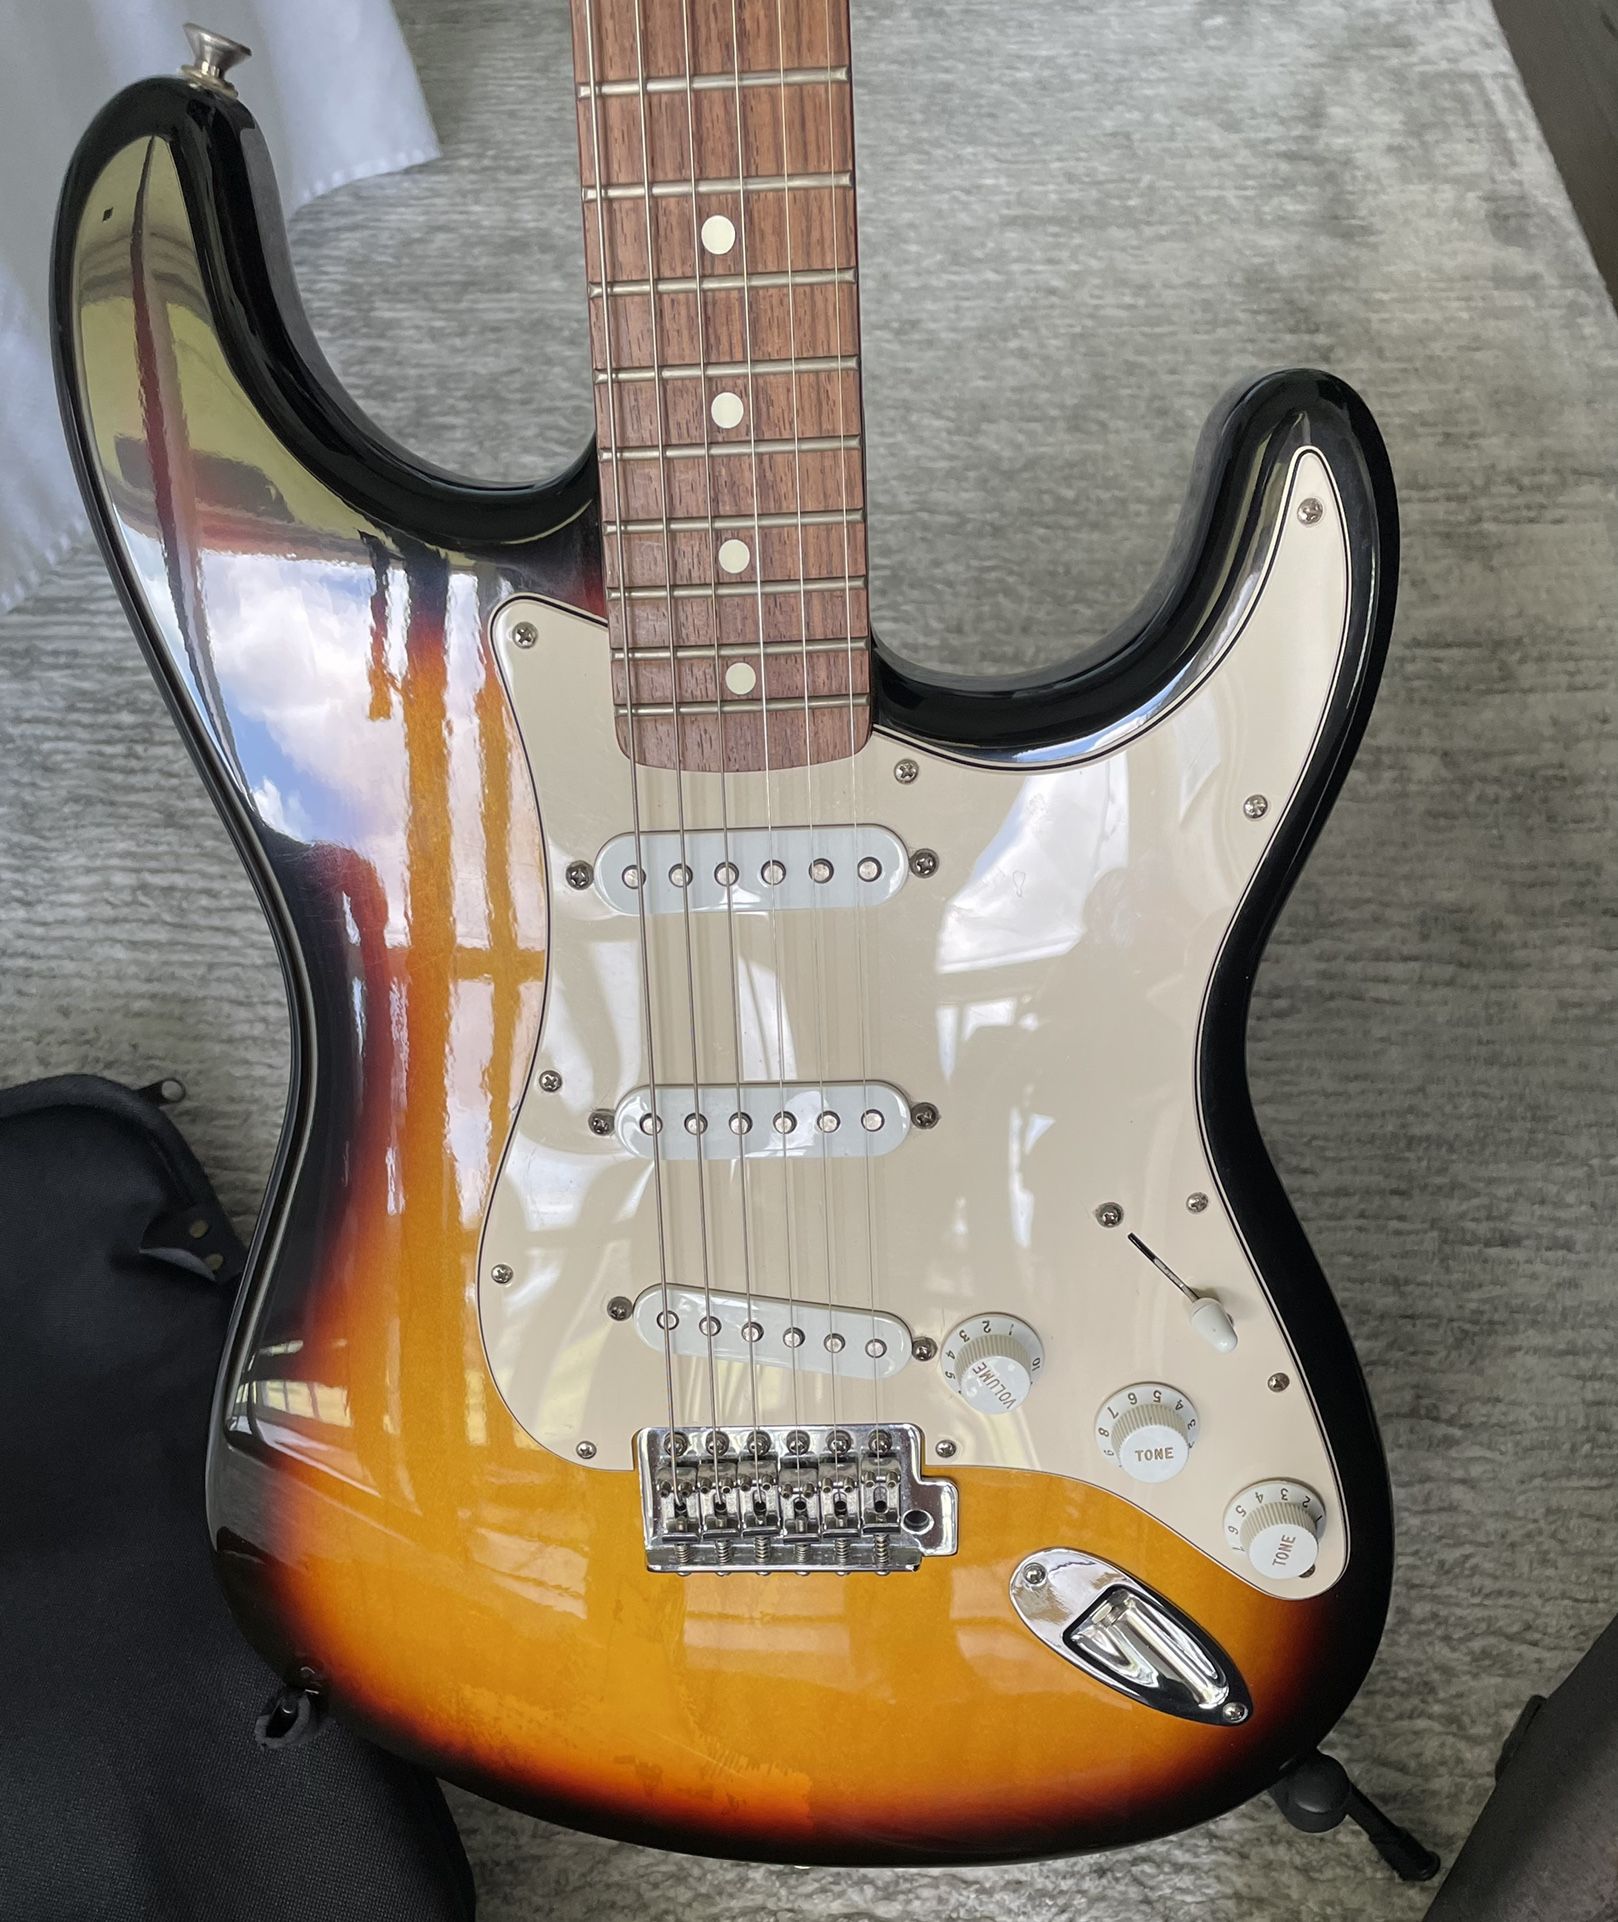 Mim Strat Sunburst Beautiful guita Low Action Gig Bag New Strings Amp Cables All Works Great As They Should 